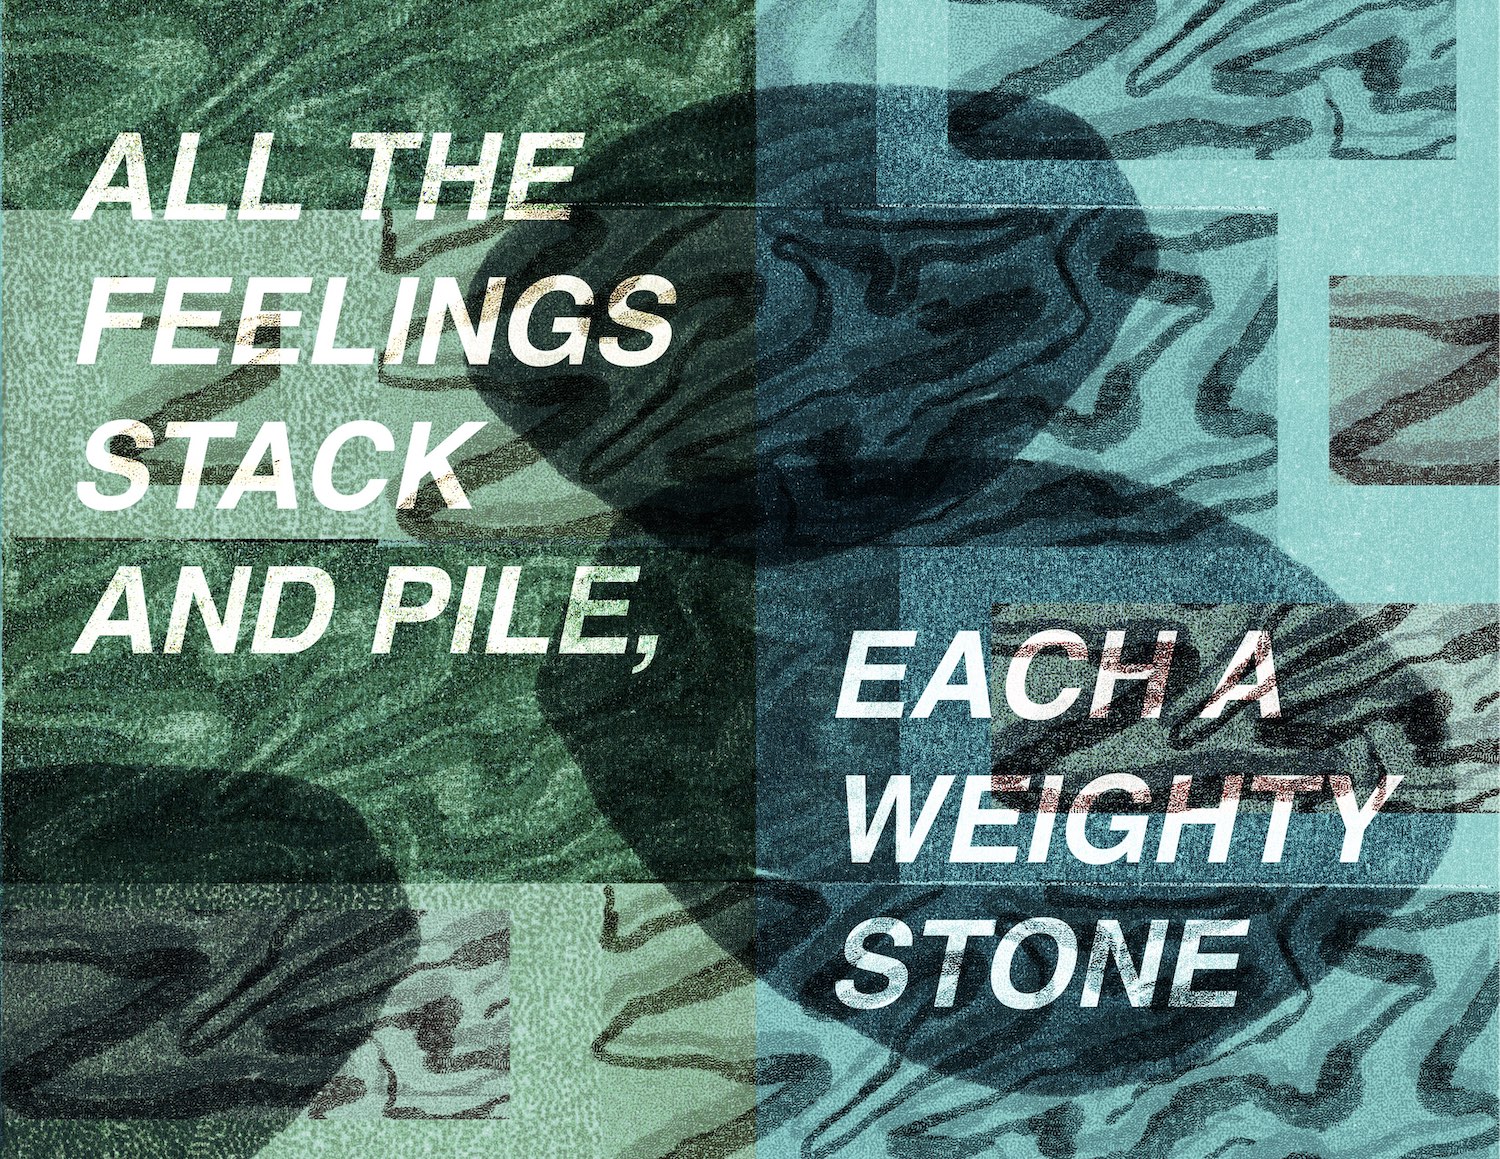 In the seventh panel of Ariana Martinez’s Not Just a Cut, we see an illustrated background with the texture of a trickling body of water. The image is divided in two - rich greens on the left and aquatic blues on the right. The shadow of two large stones balance in the middle of the image, with a third stone in the left hand corner - as if the current is pulling it out of the image. White text reads, All the feelings stack and pile, each a weighty stone.